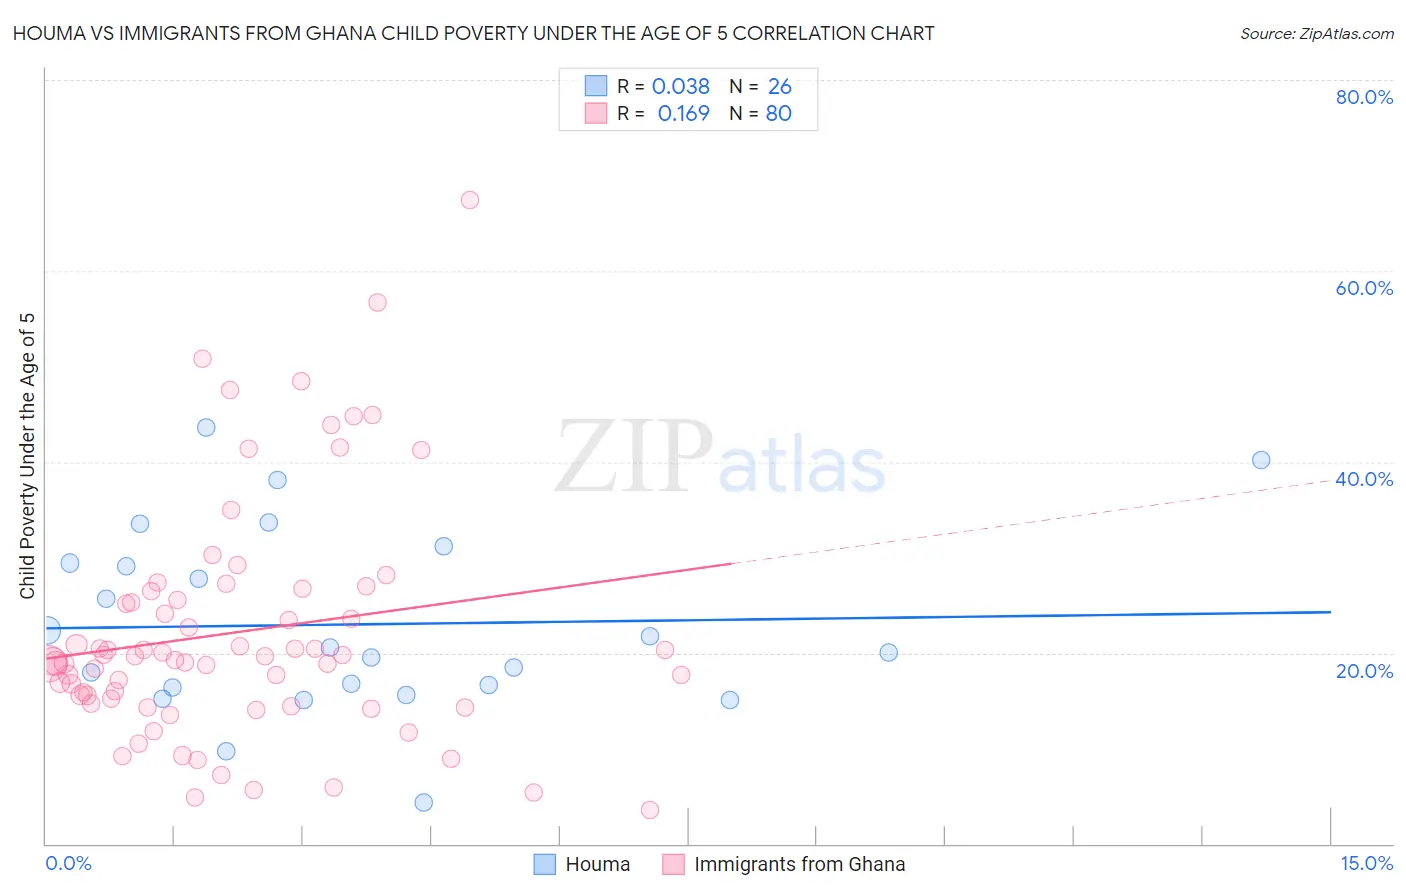 Houma vs Immigrants from Ghana Child Poverty Under the Age of 5